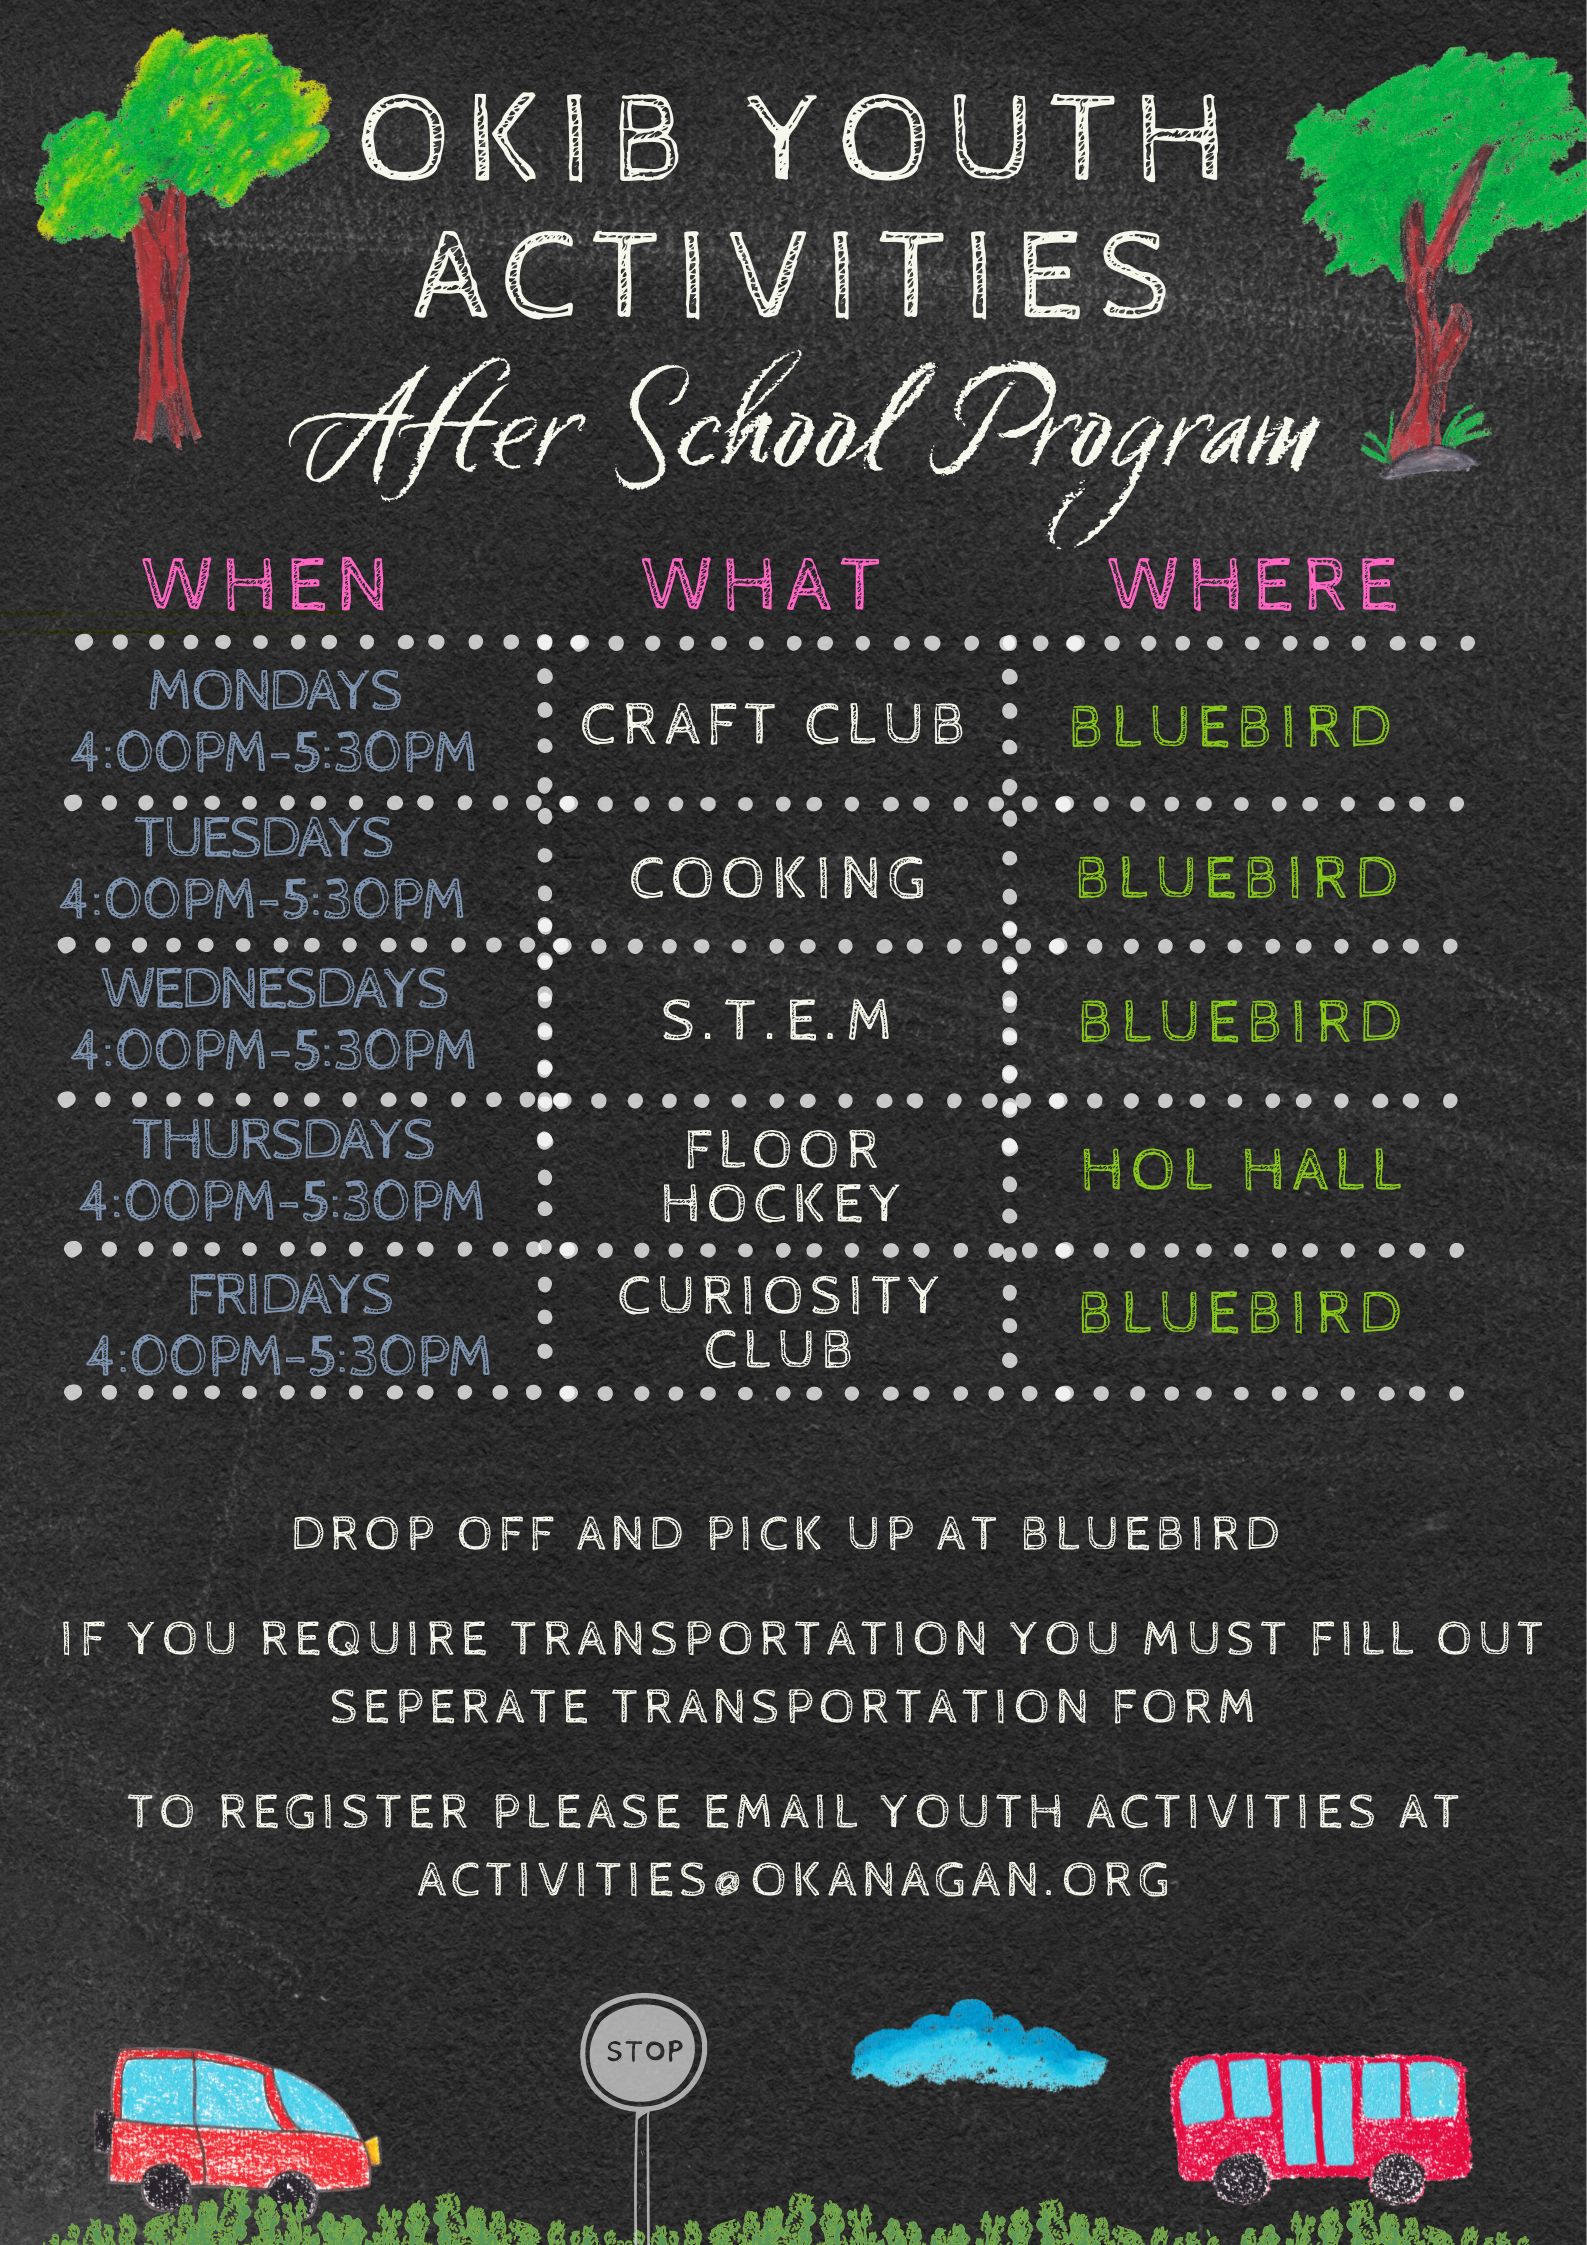 OKIB Youth Activities after school events